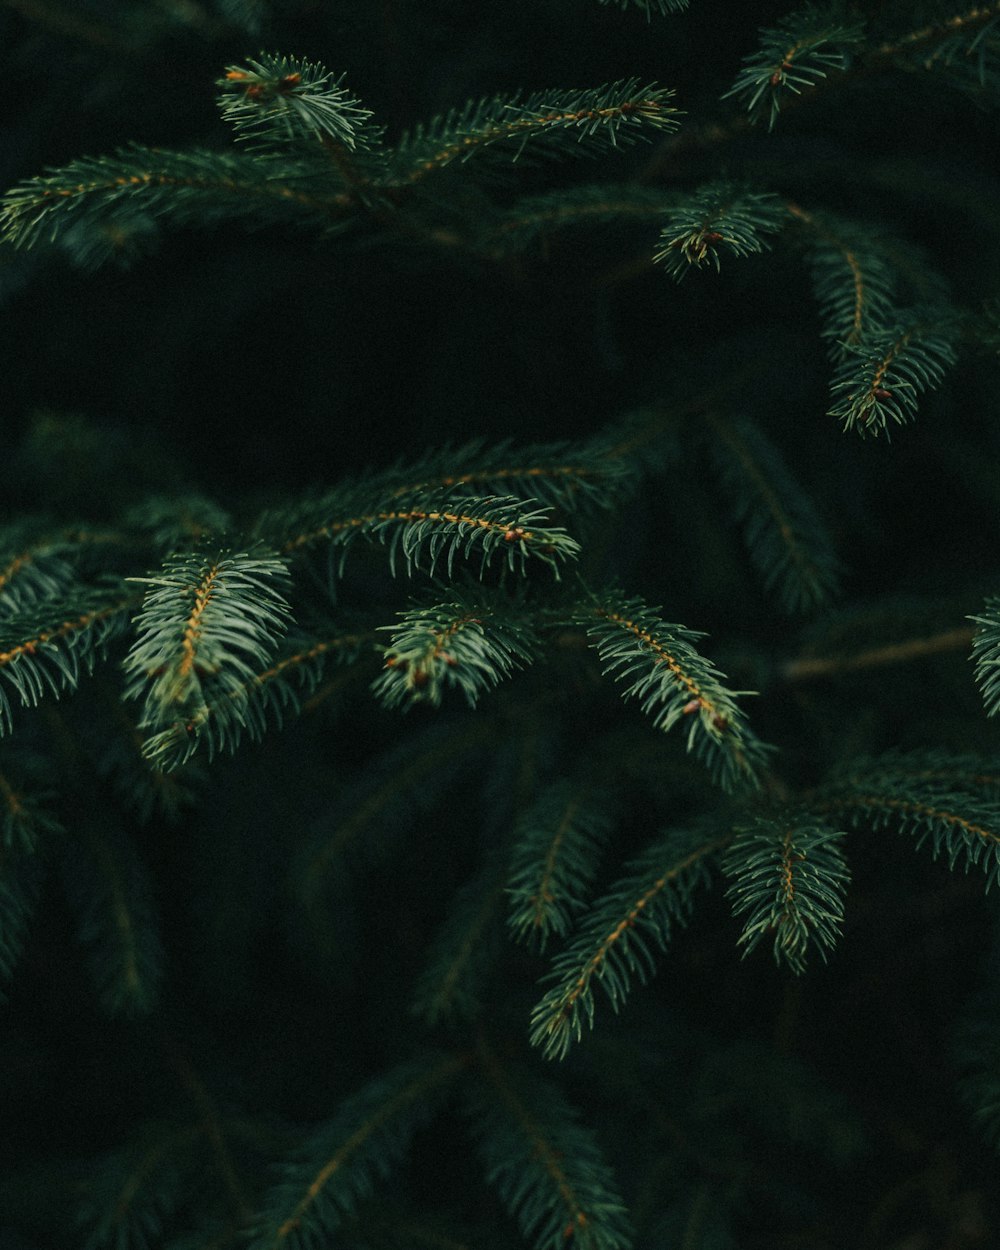 a close-up of some pine trees